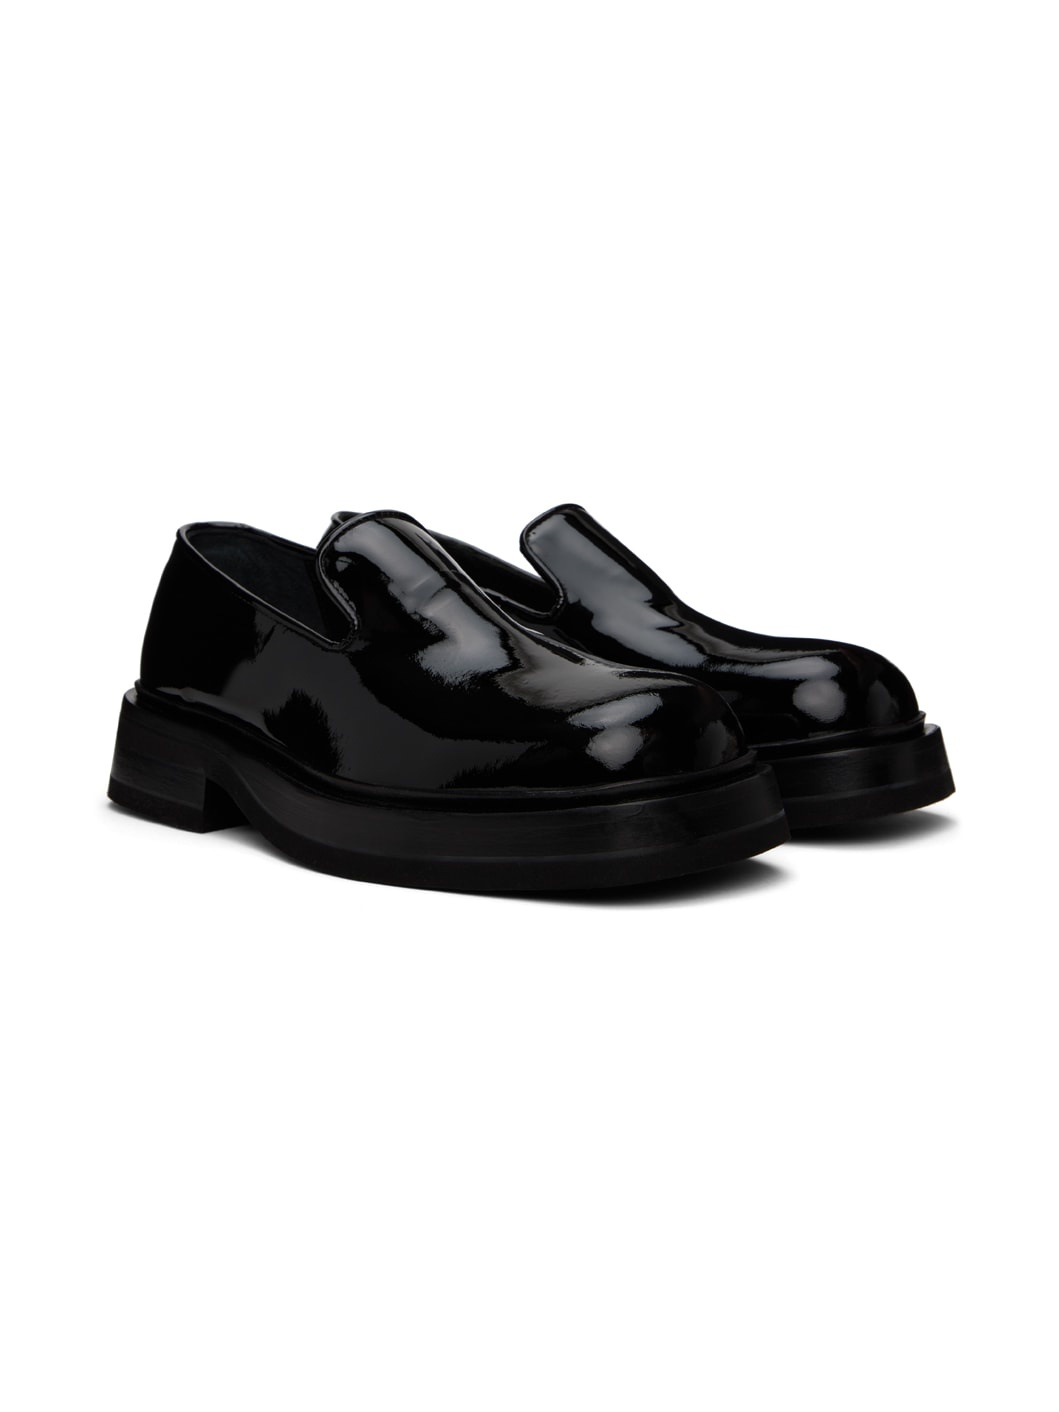 Black Chateau Loafers - 4